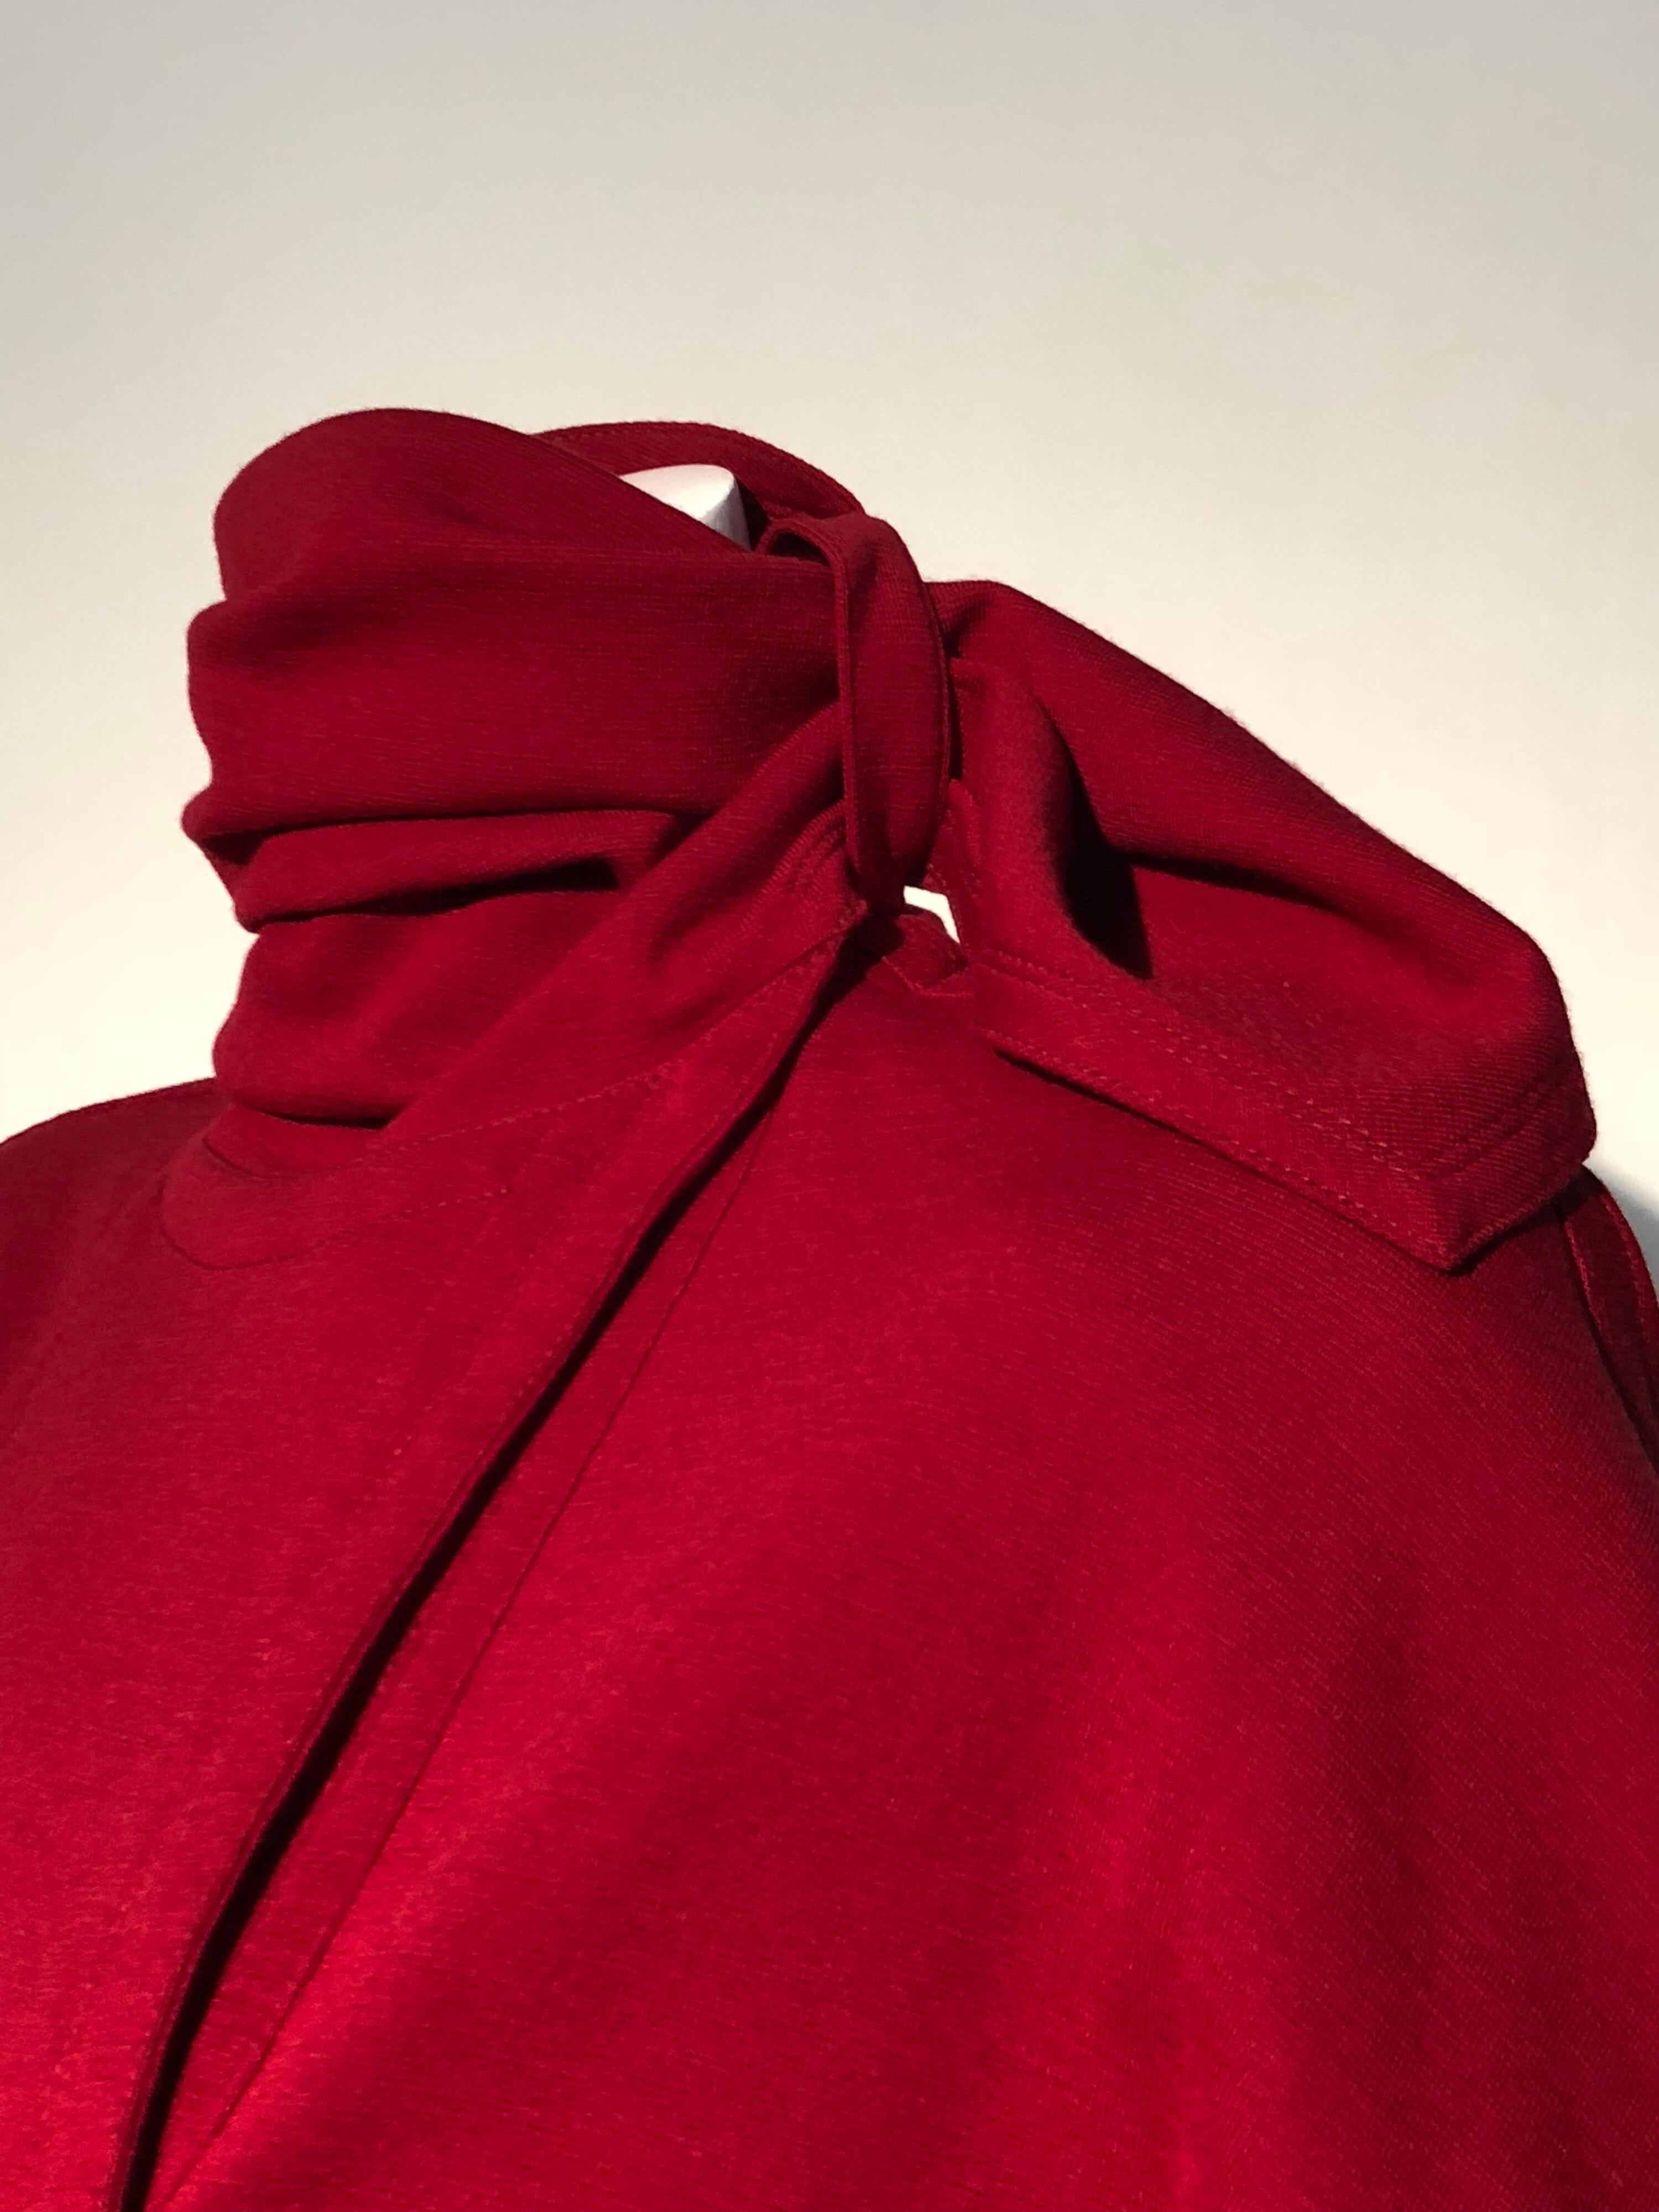 1980s Gianni Versace Vivid Red Wool Wrap-Style Coat Dress W/ Attached Foulard For Sale 1